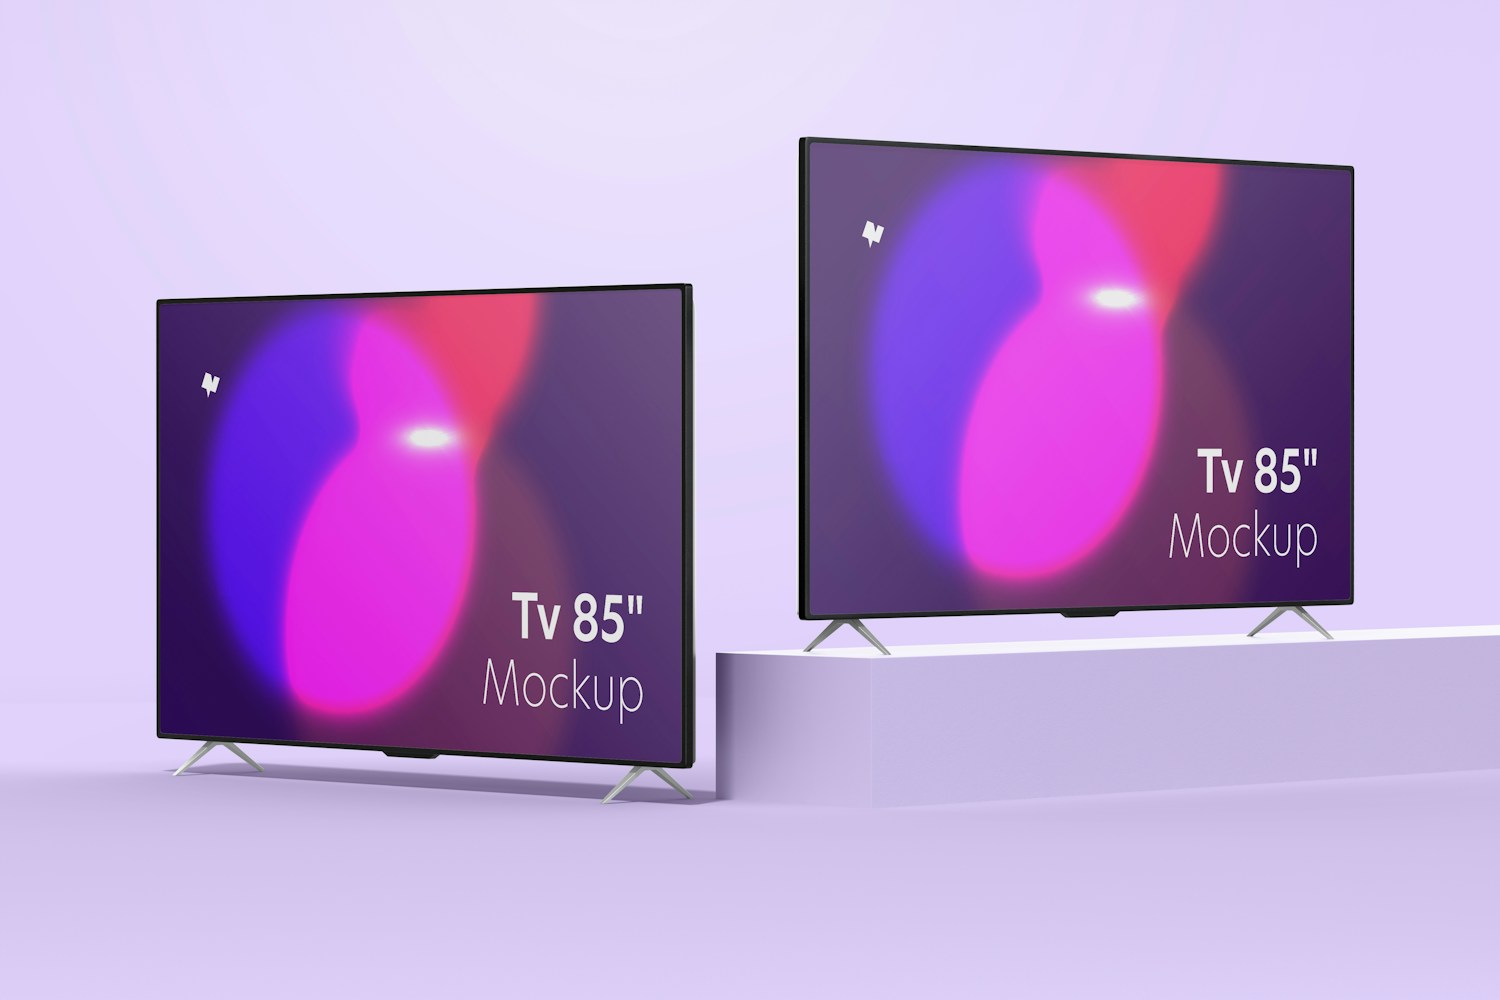 TVs 85" Mockup, Left and Right View